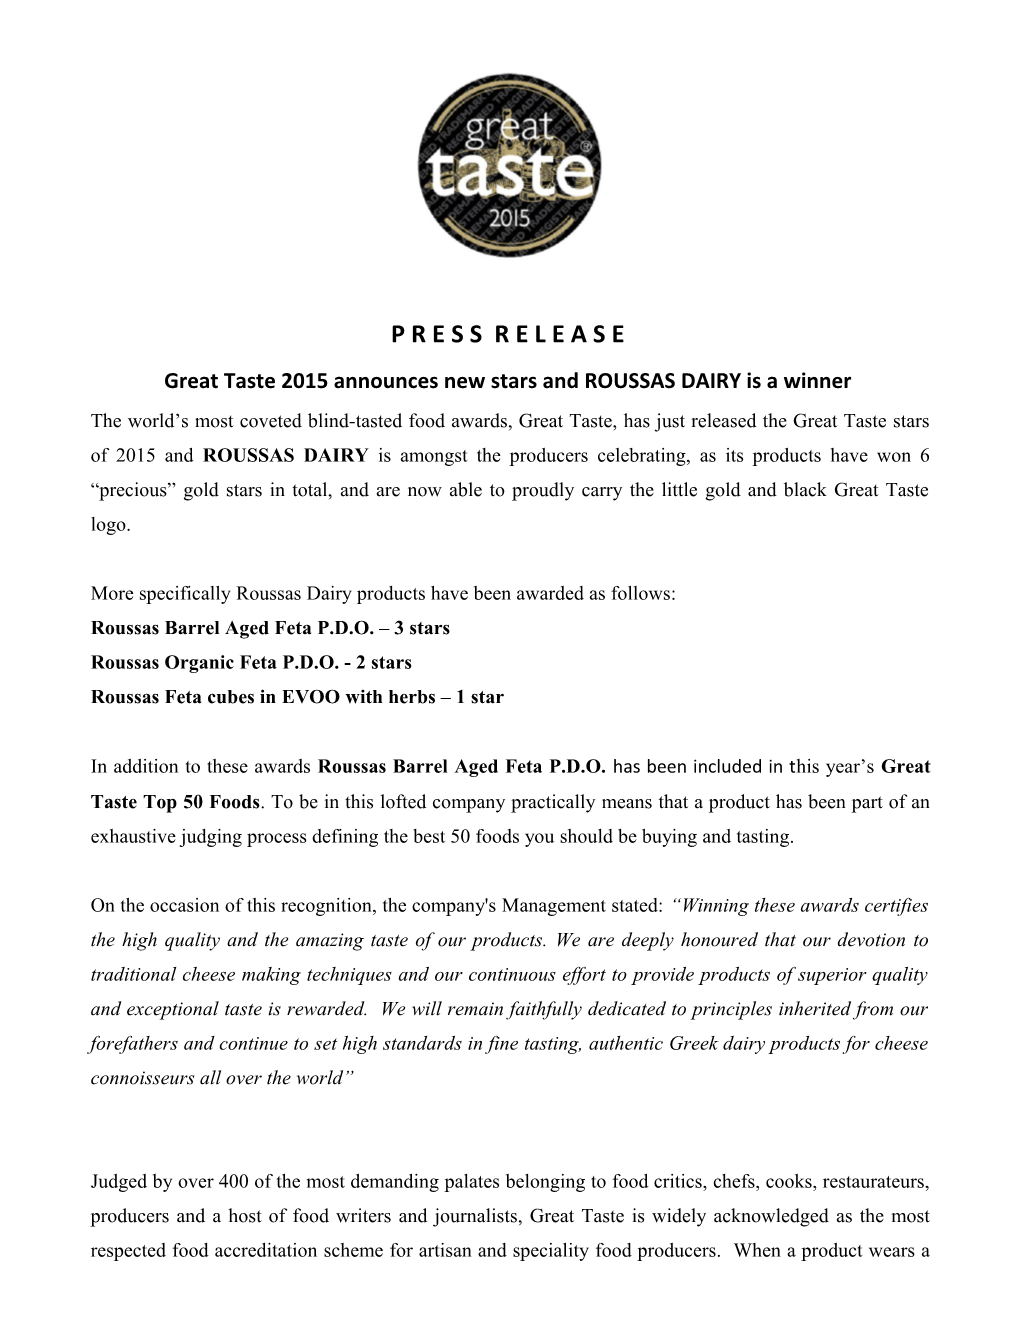 Great Taste 2015Announces New Stars and ROUSSAS DAIRY Is a Winner